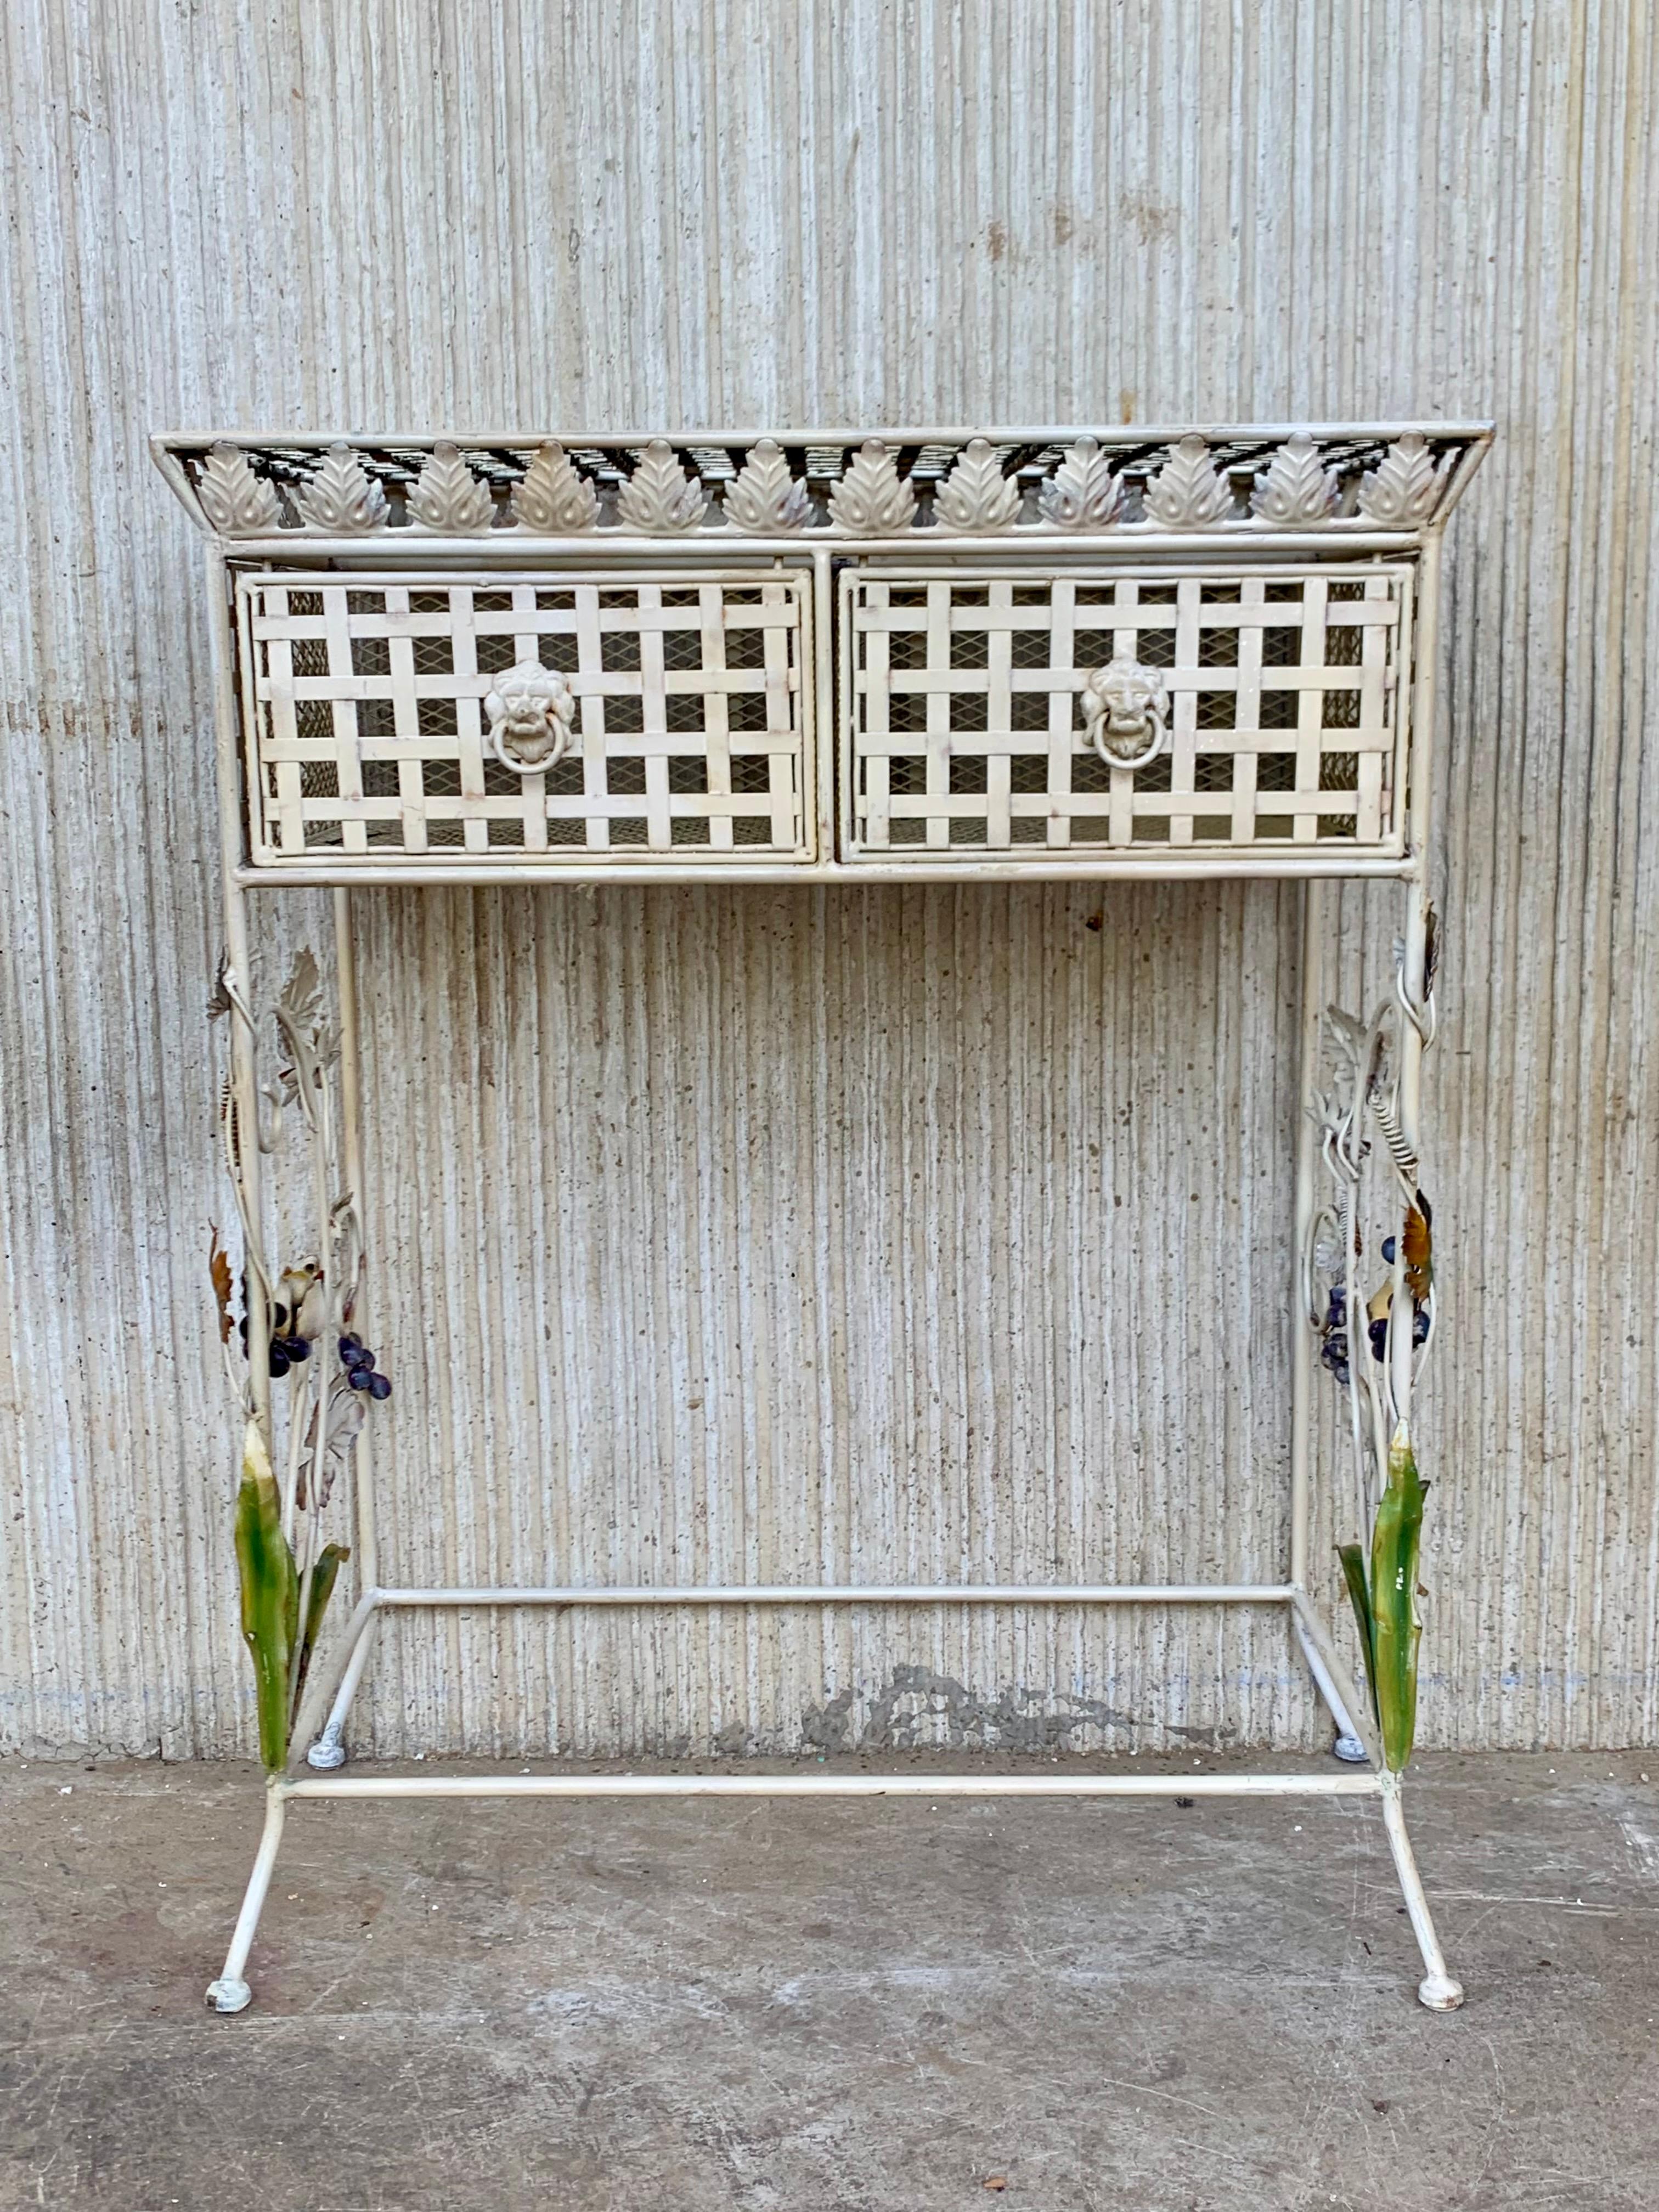 This is a chic French or Spanish late-19th century Forged iron console with two drawers. 
The side are decorated with ornamental flowers handprinted.
The iron has the corrosion wear of the time.
 This table would add a sculptural feel to any